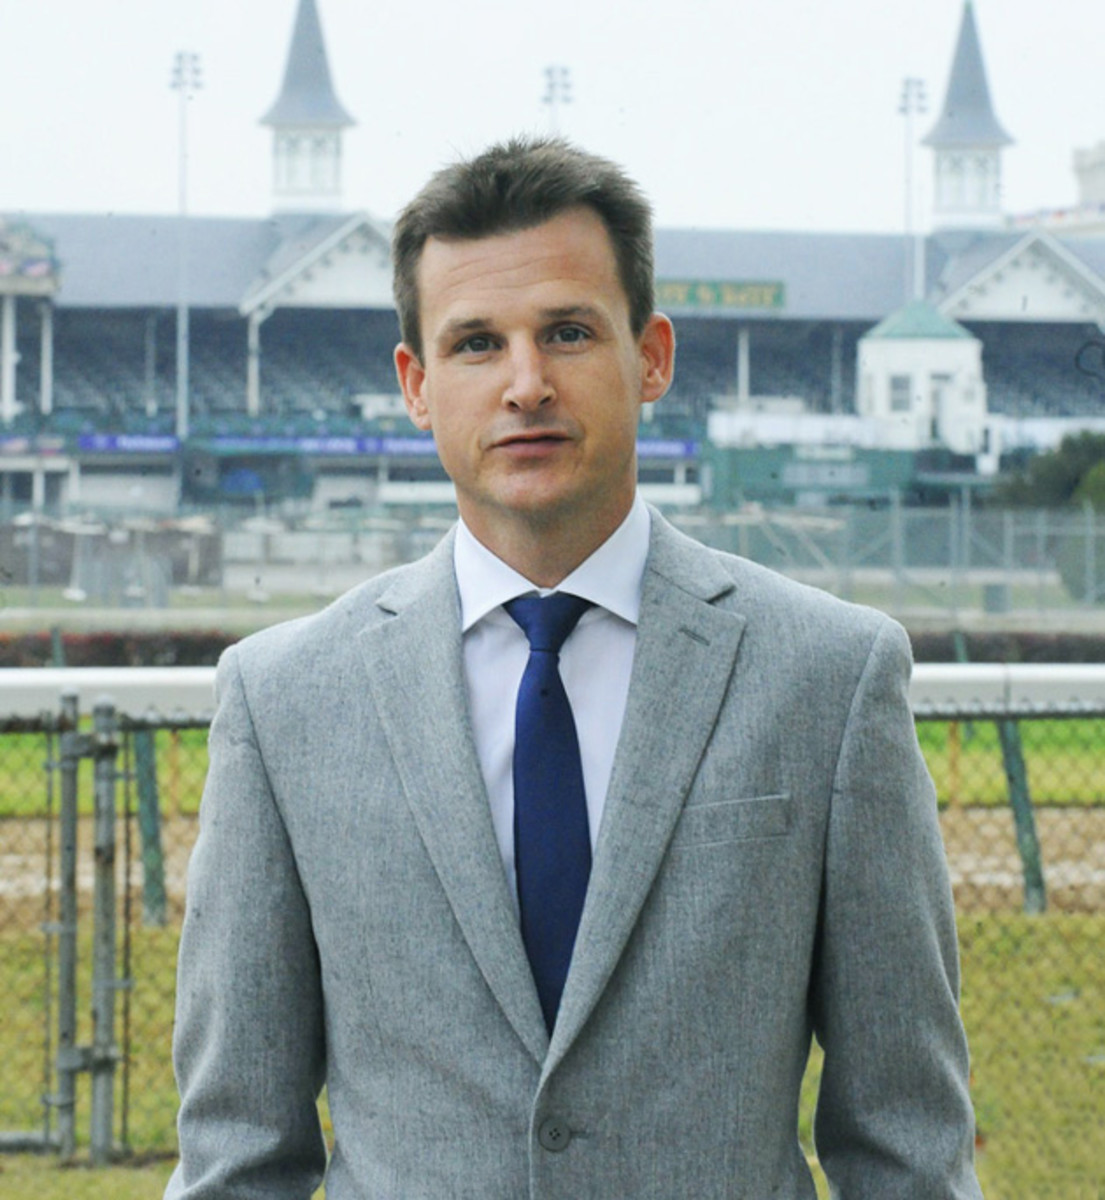 Dyrdek, who’s made his name in skateboarding an on TV, has owned as many as 13 horses at a time.